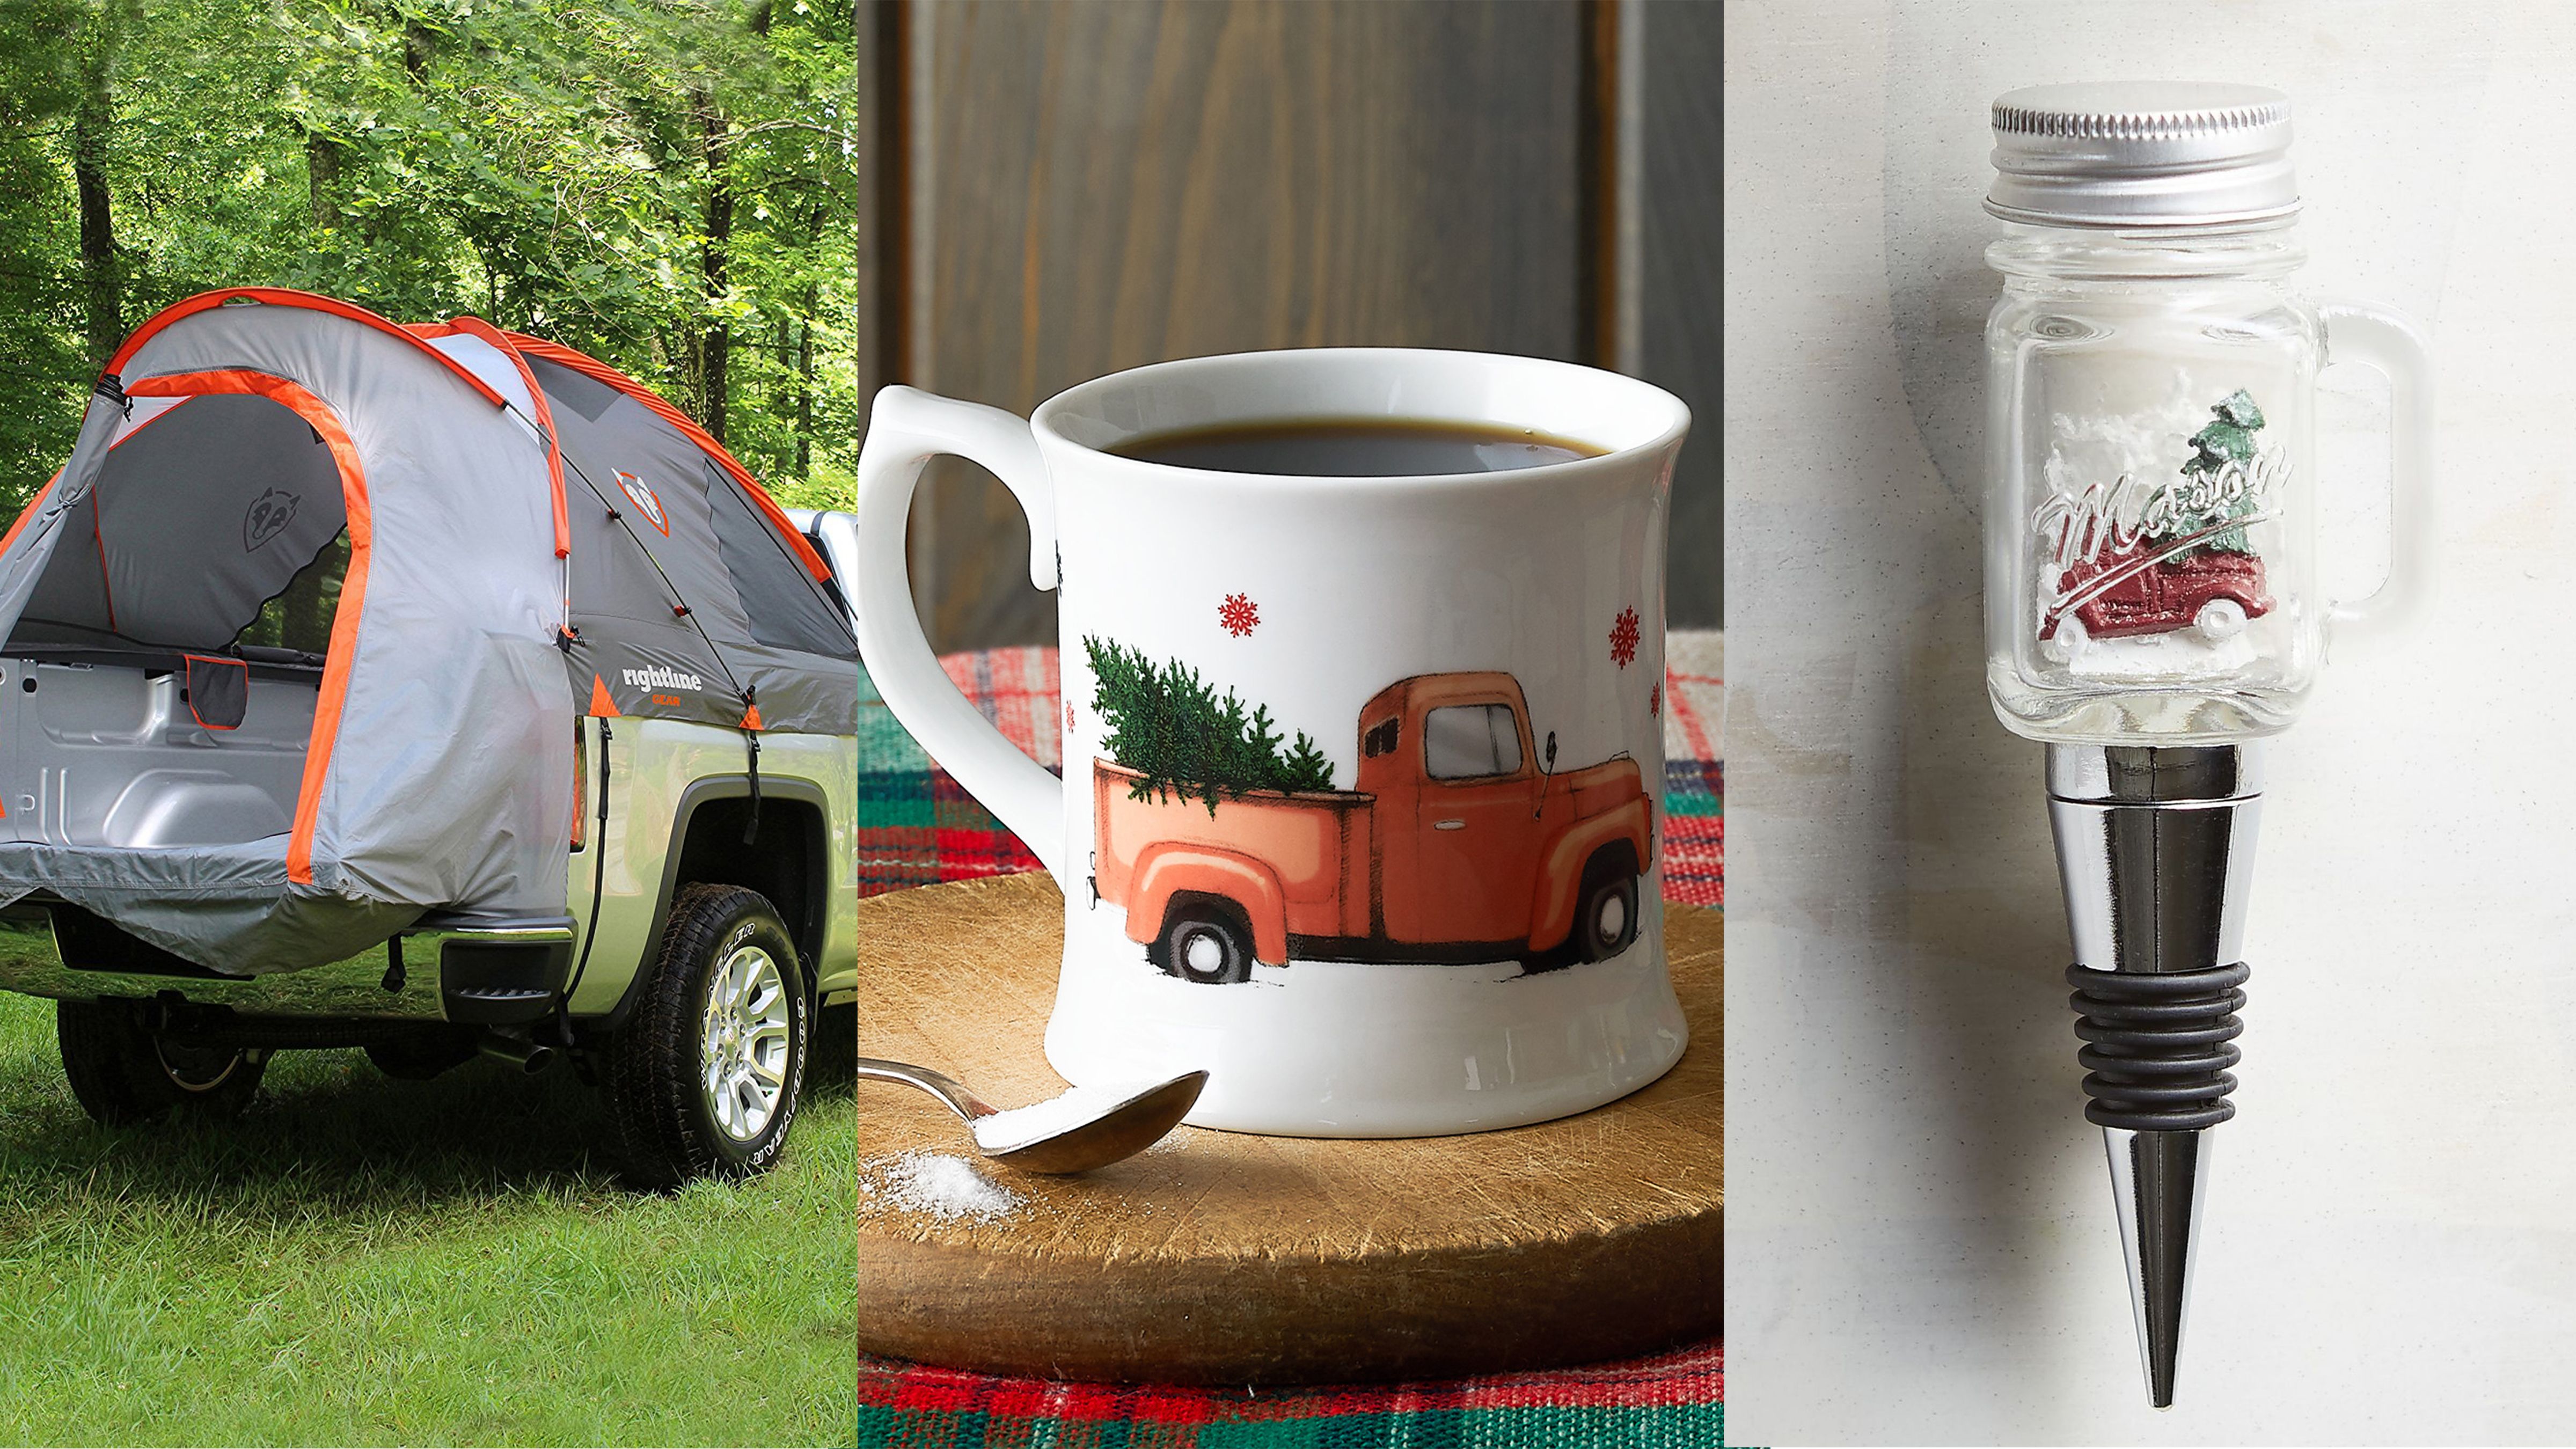 Looking for the best gifts for truck drivers this holiday season?